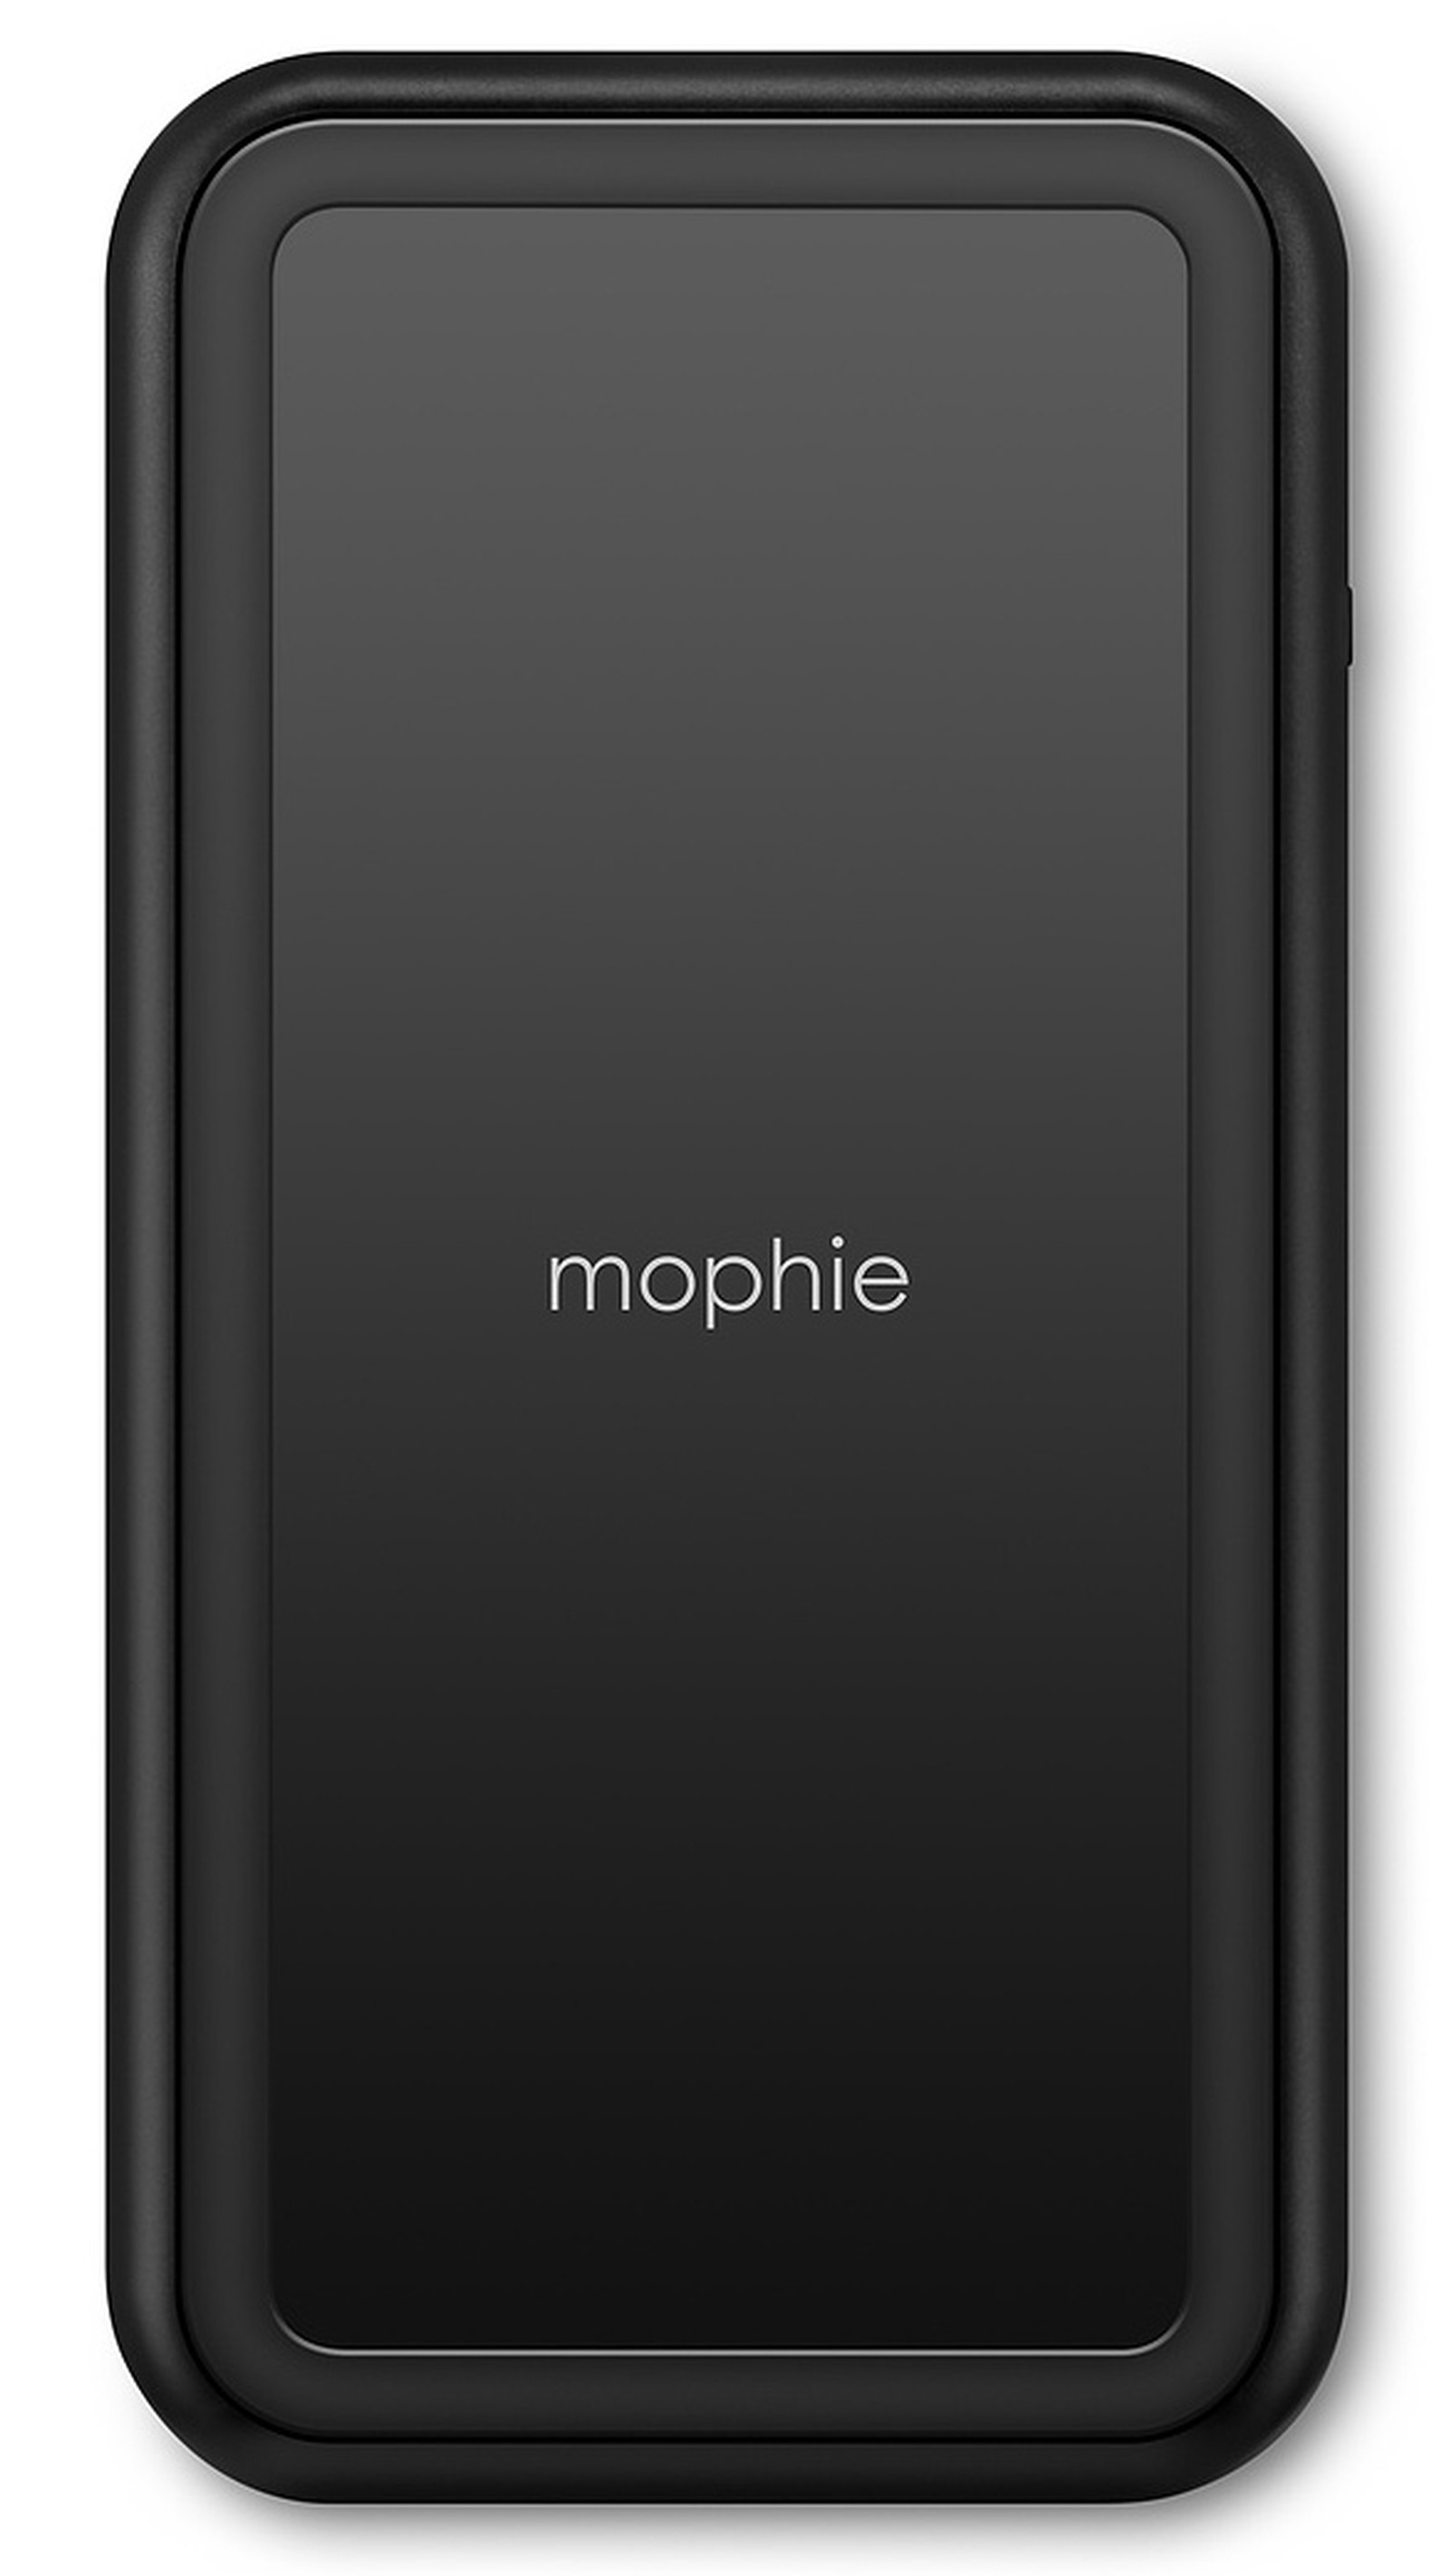 Mophie Debuts New Powerstation Wireless XL Portable Battery, Available